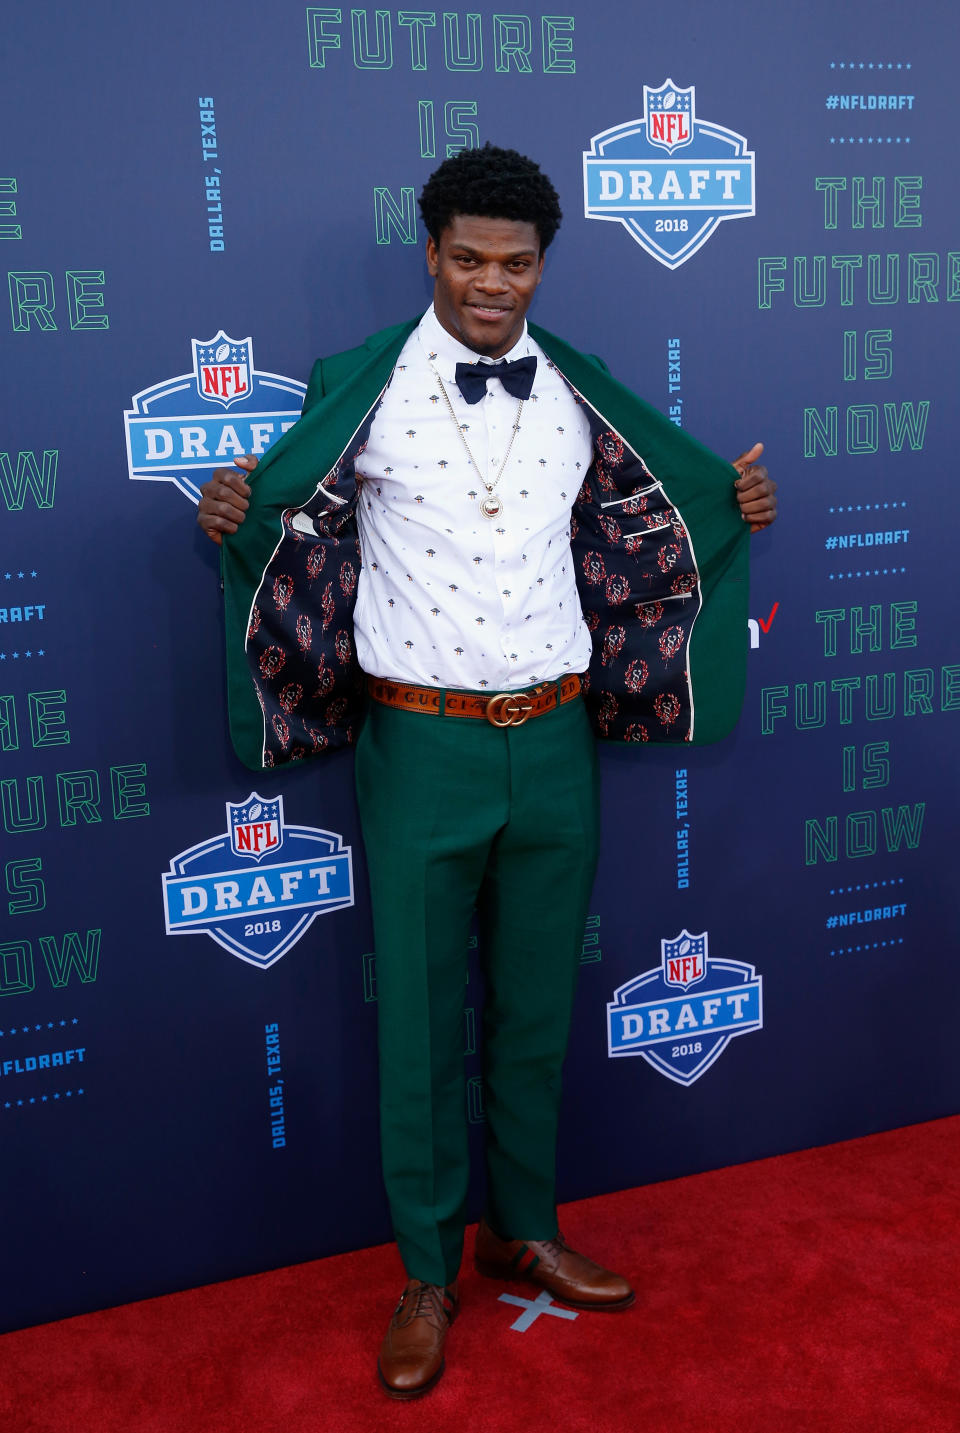 <p>Lamar Jackson of Louisville poses on the red carpet prior to the start of the 2018 NFL Draft at AT&T Stadium on April 26, 2018 in Arlington, Texas. (Photo by Tim Warner/Getty Images) </p>